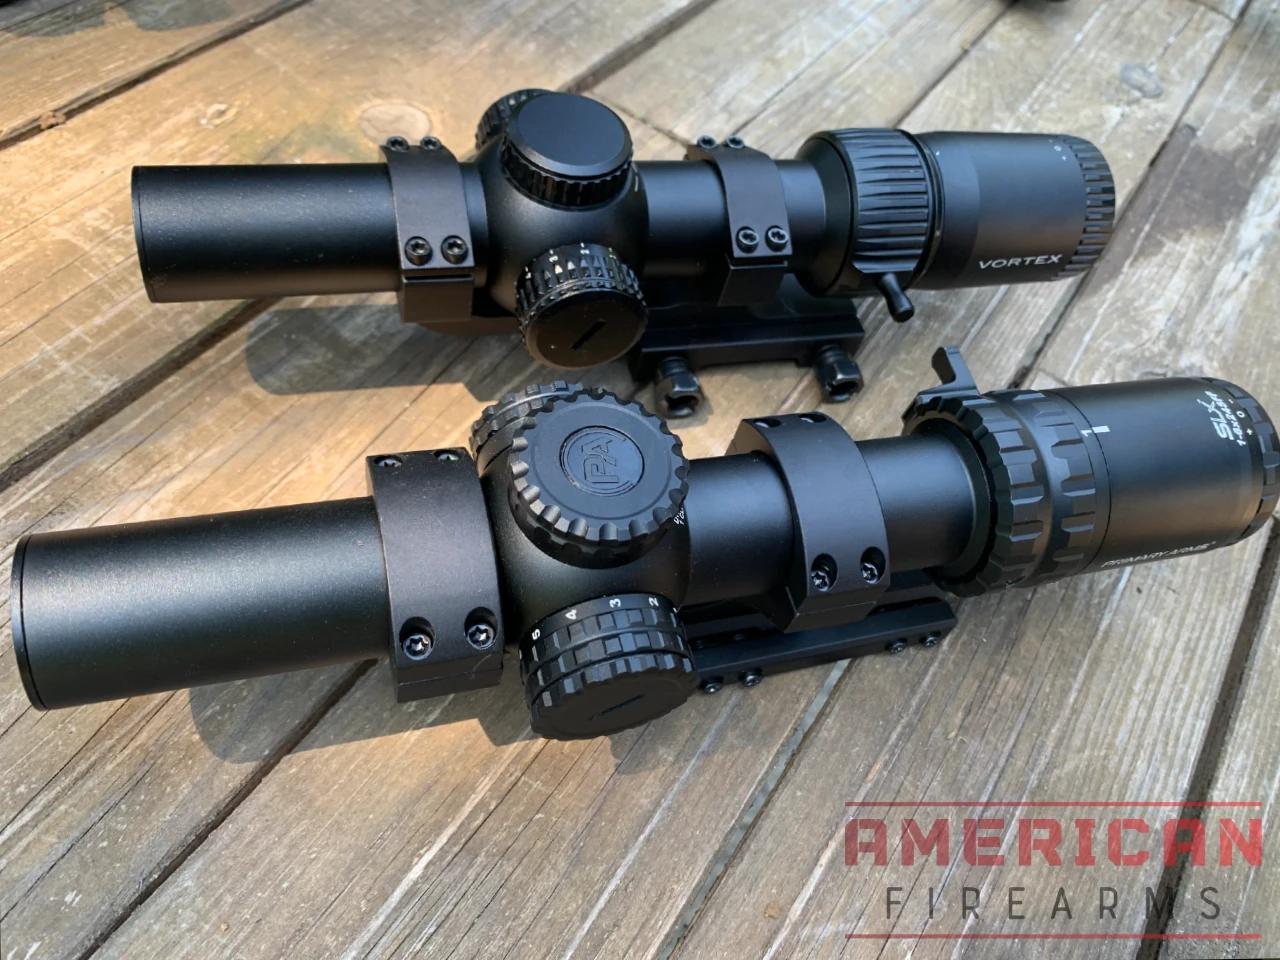 Vortex Strike Eagle compared to the PA SLx 1x6. At 17.6 oz the Strike Eagle is on the lighter side for 1-8x variable scopes.